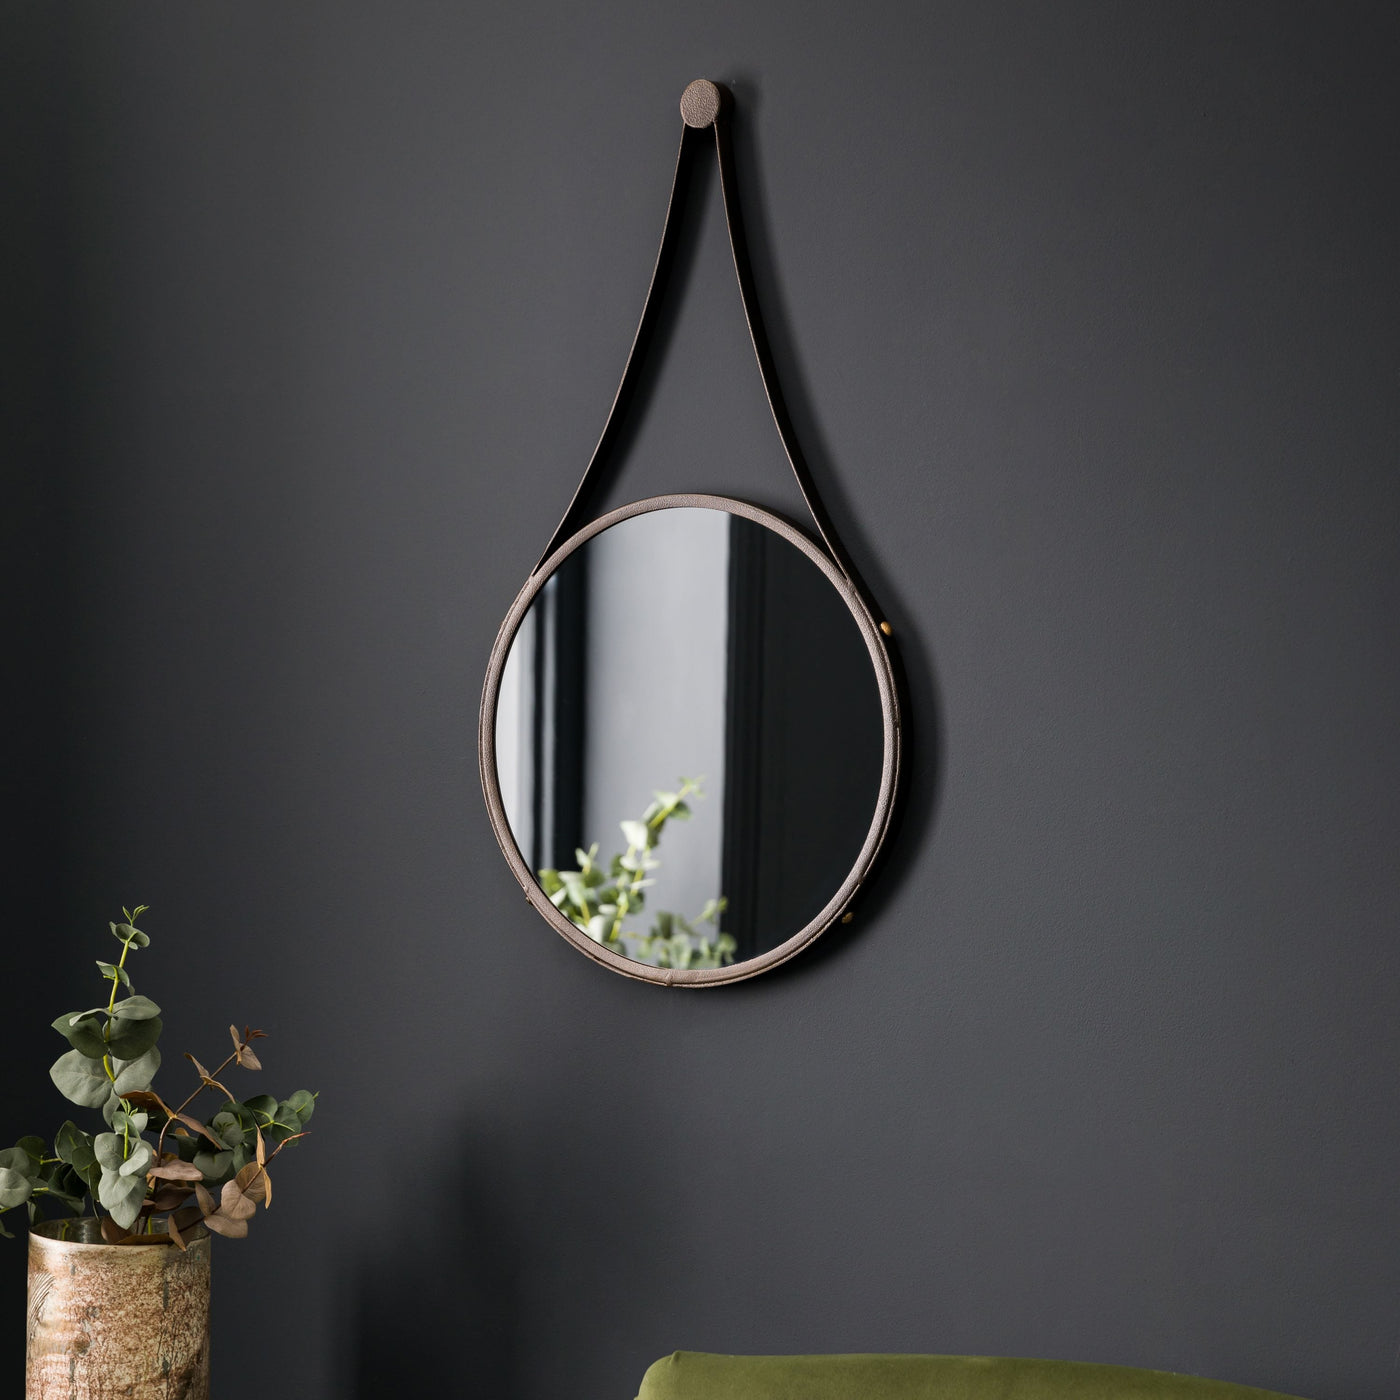 Bodhi Living Bedworth Round Mirror - Small House of Isabella UK